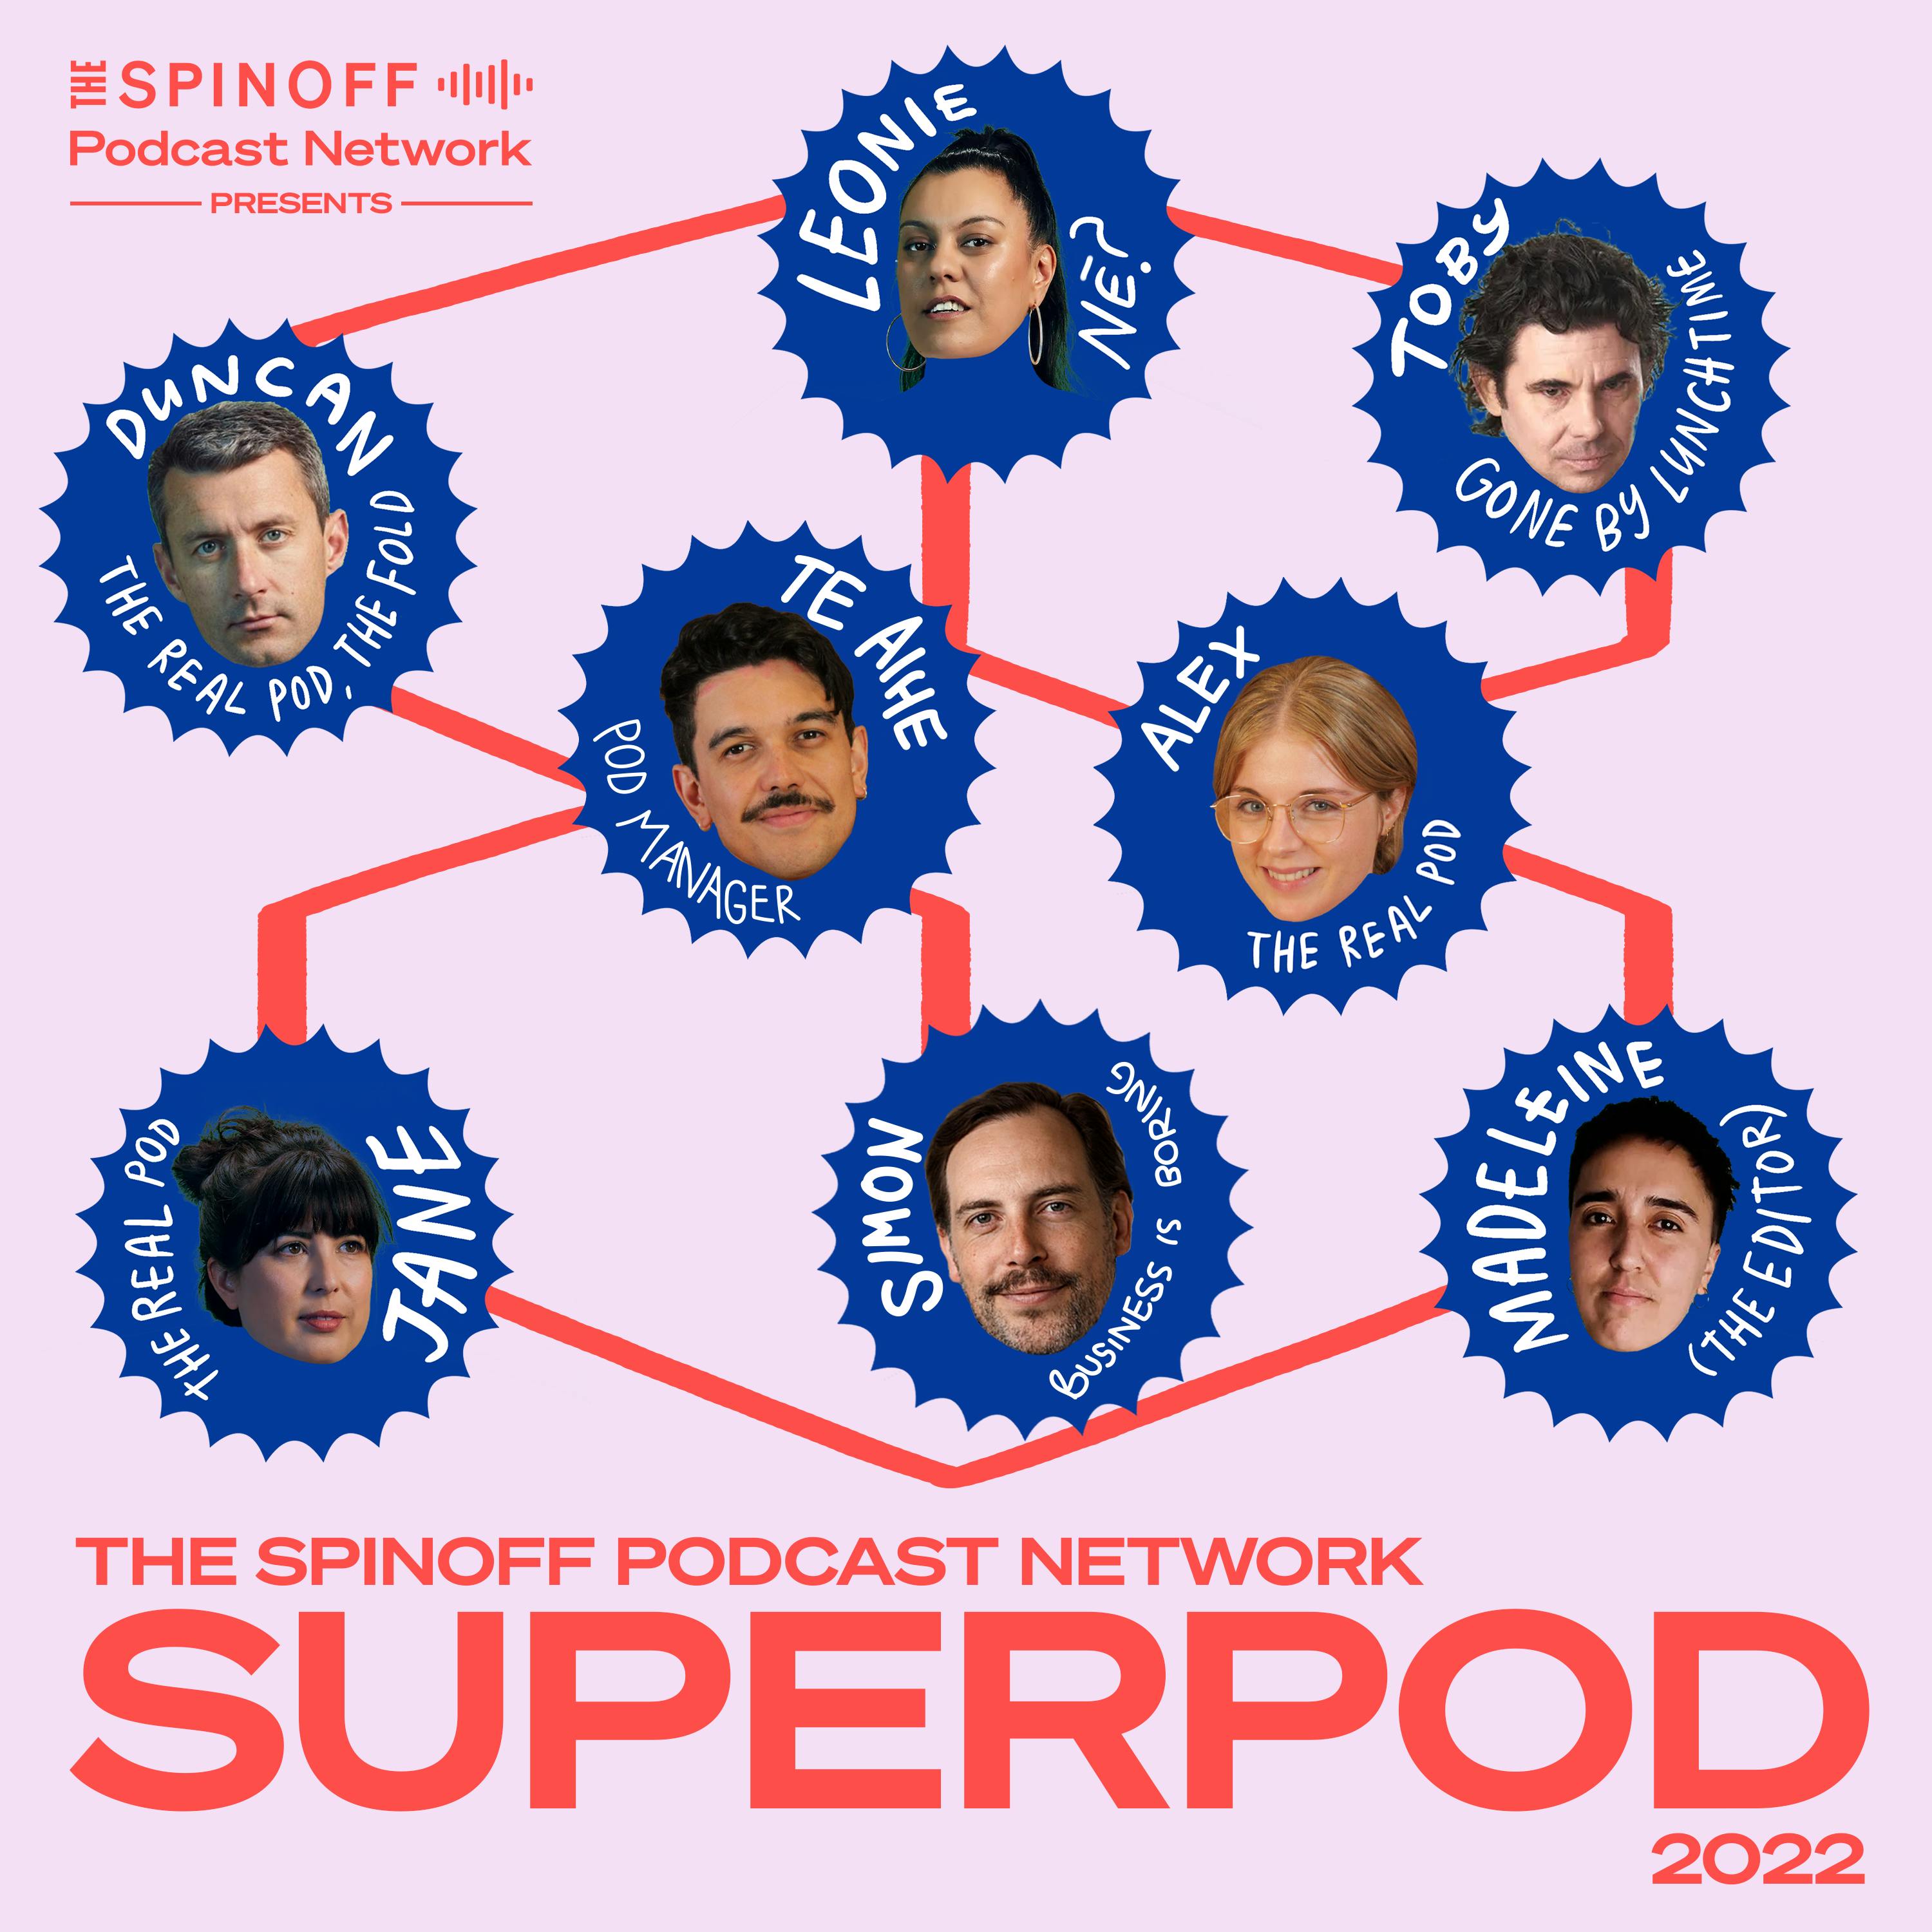 The Spinoff presents SUPERPOD 2022